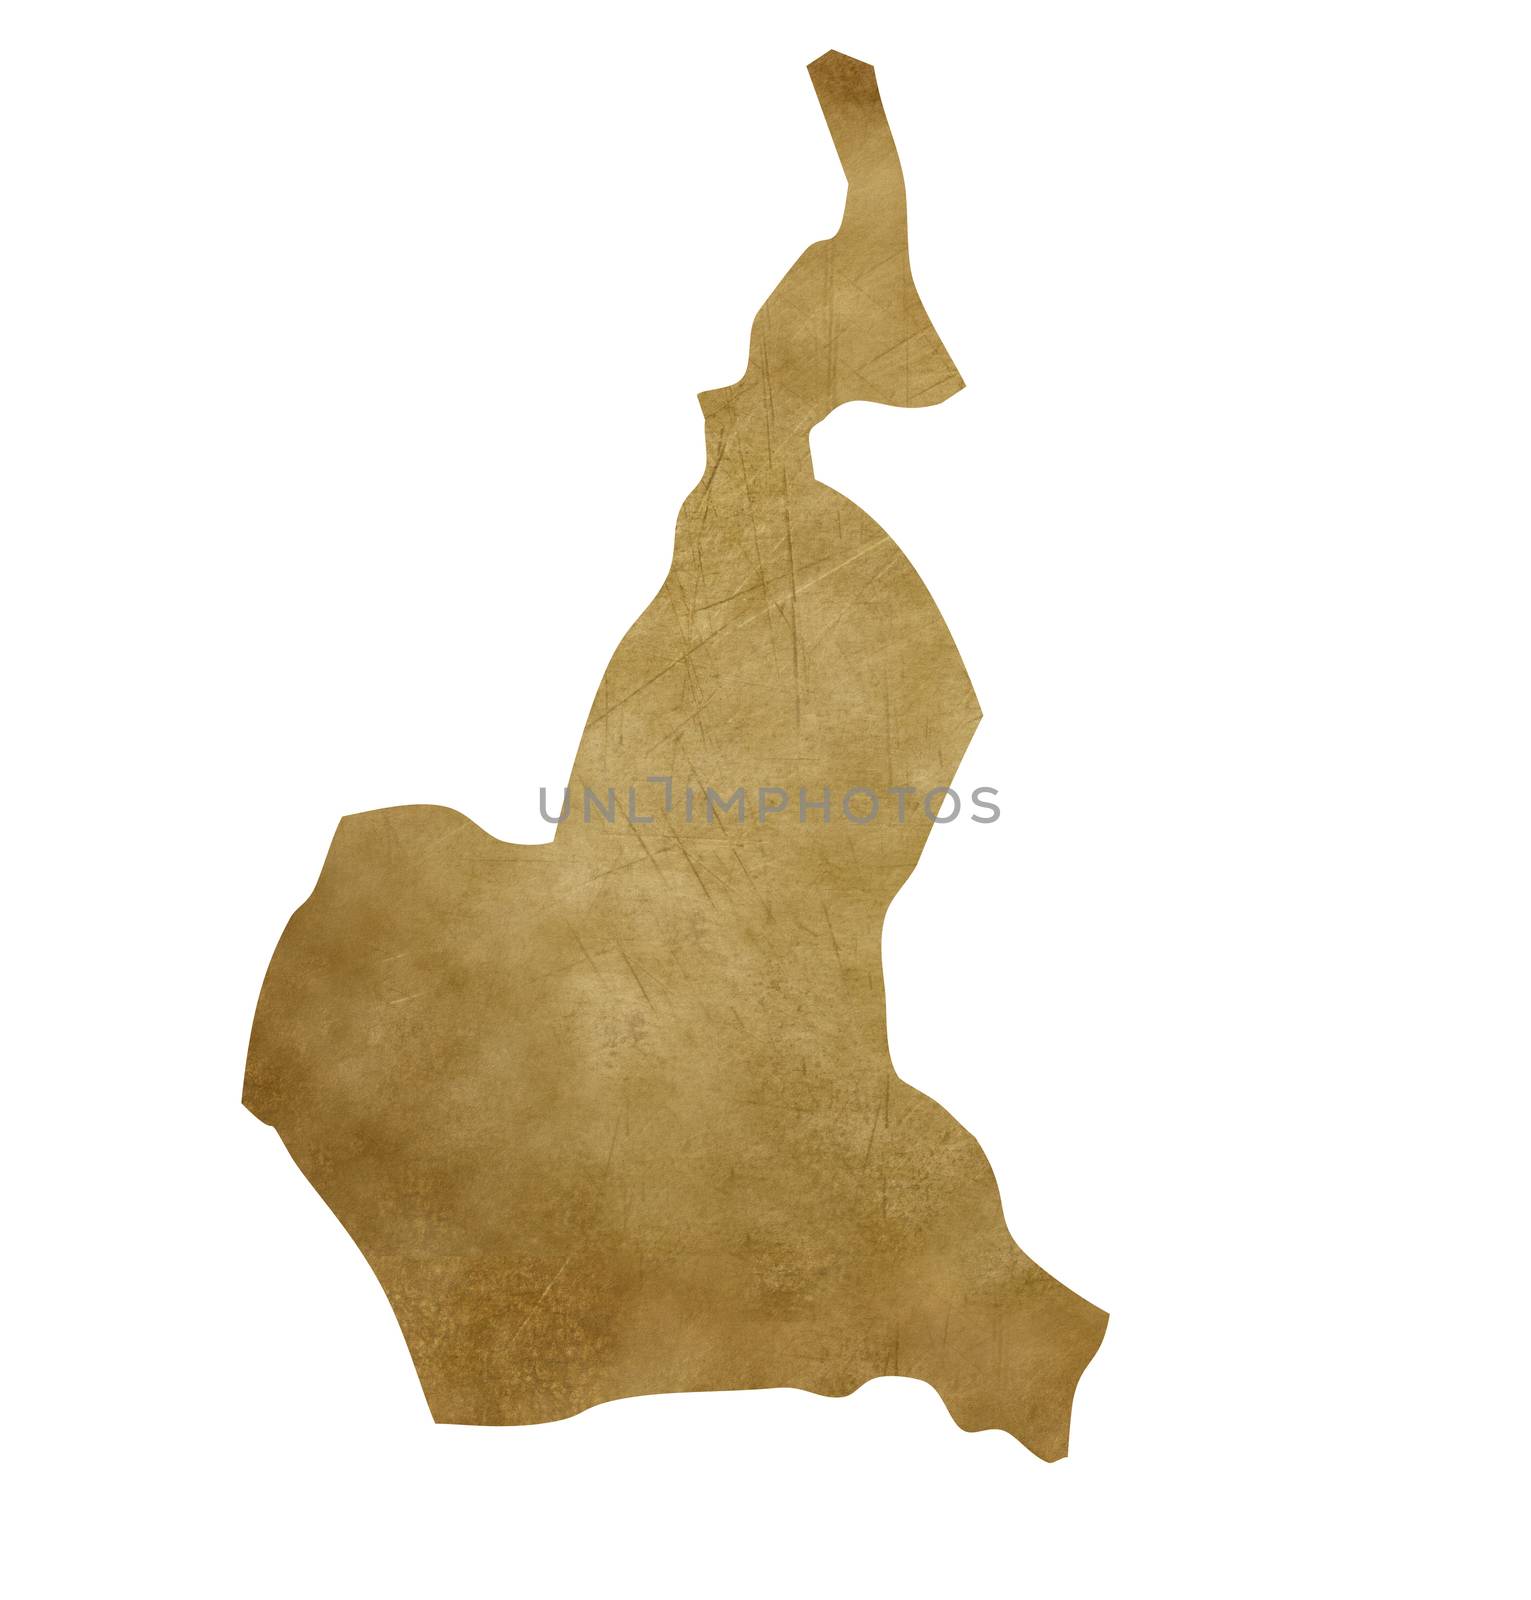 Cameroon grunge map in treasure style isolated on white background.